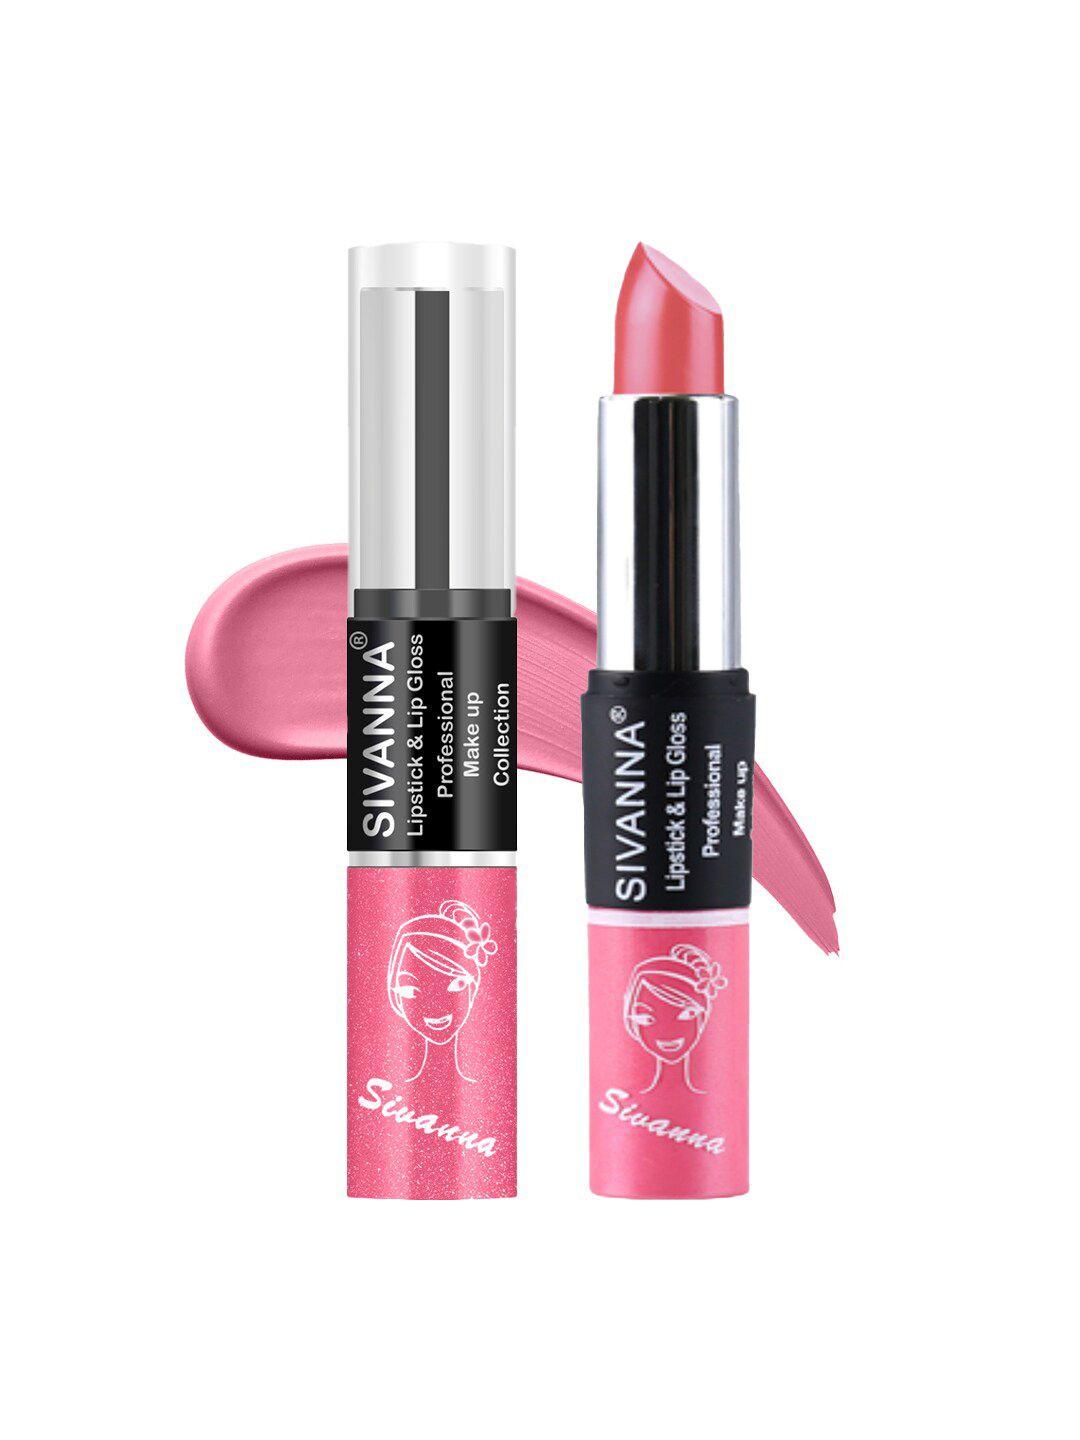 sivanna colors professional makeup collection 2 in 1 lipstick & lip gloss - dk061 13